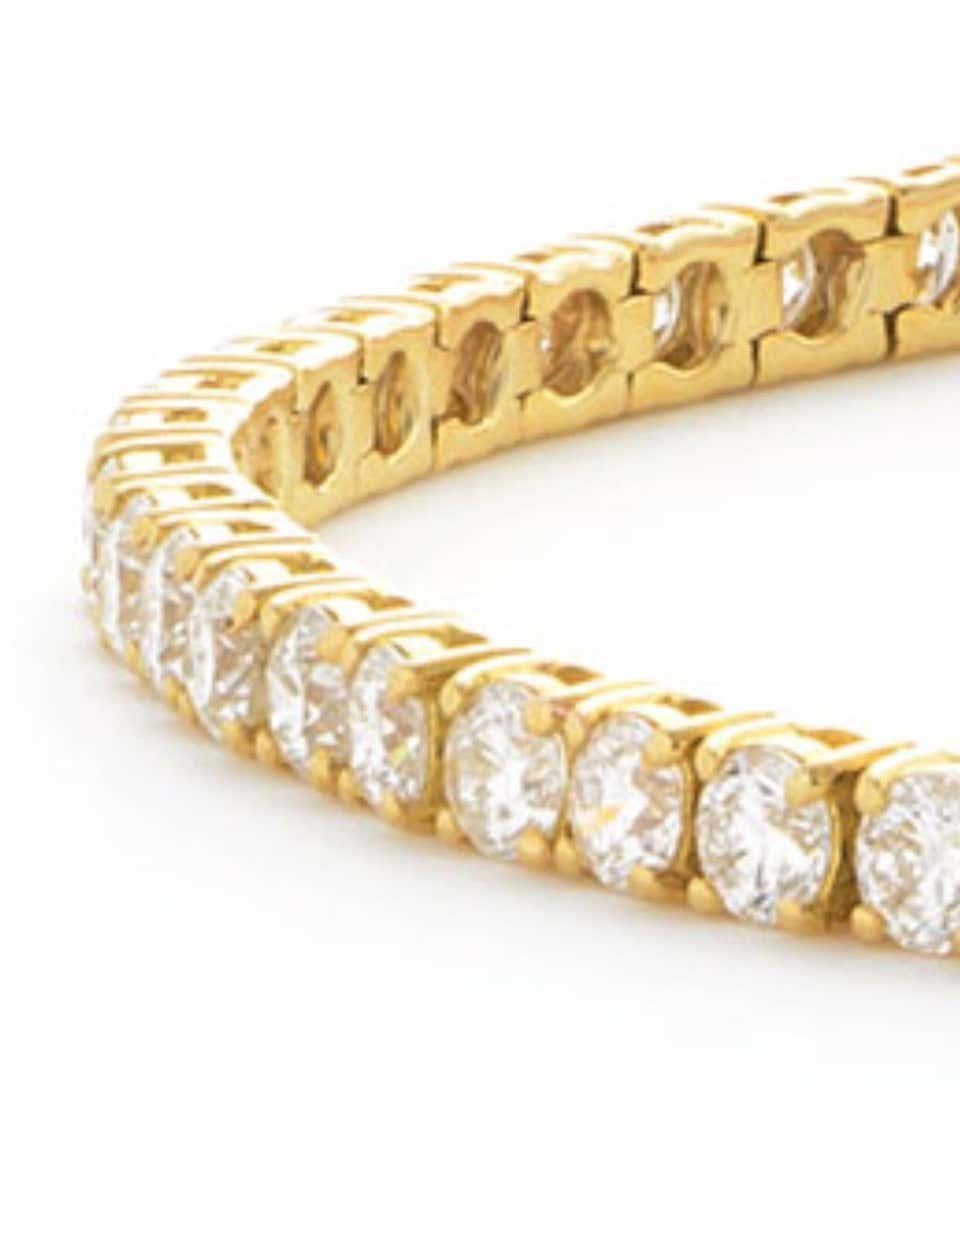 A classic piece that stands the test of time, enjoy the ultimate in luxury and beauty with this gorgeous diamond tennis bracelet, featuring 3.00 Carat of dazzling White Color G Clarity SI1 Round Brilliant Cut diamonds beautifully held in a classic 4